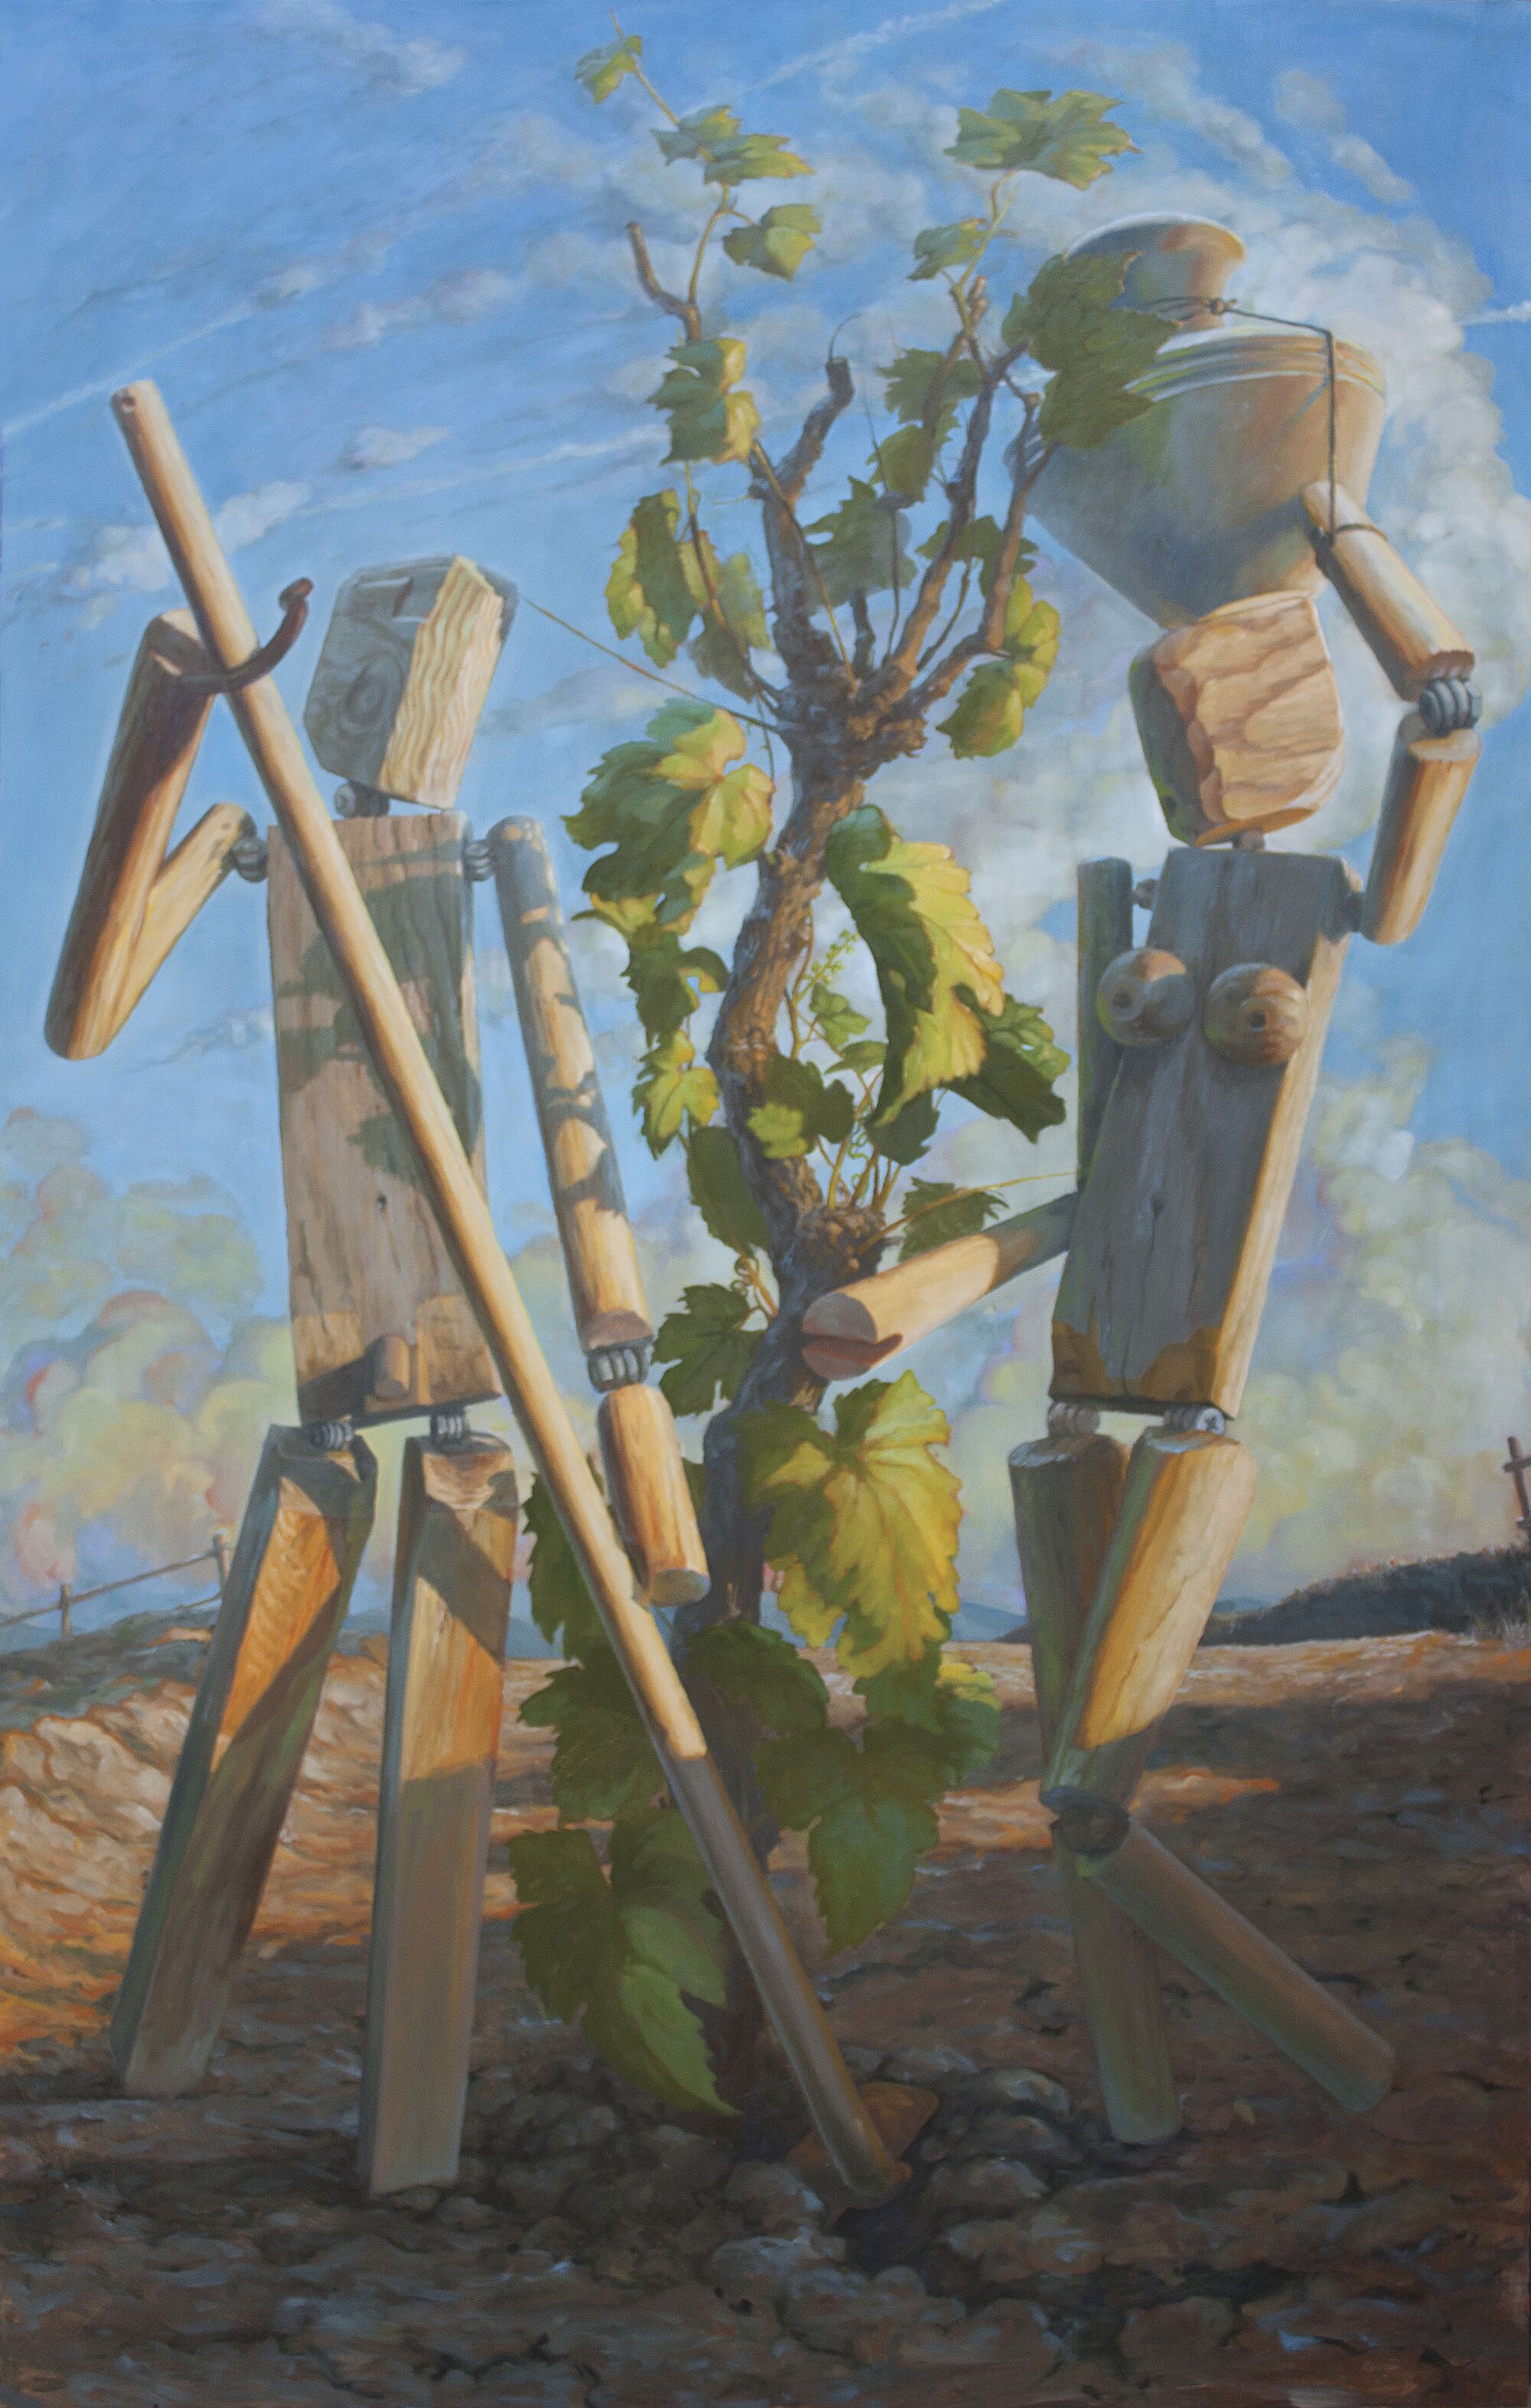 "Second Chapter of Eden" by Guy Kinnear is a part of an exhibit at Oceanside Museum of Art titled "A Kind of Heaven."